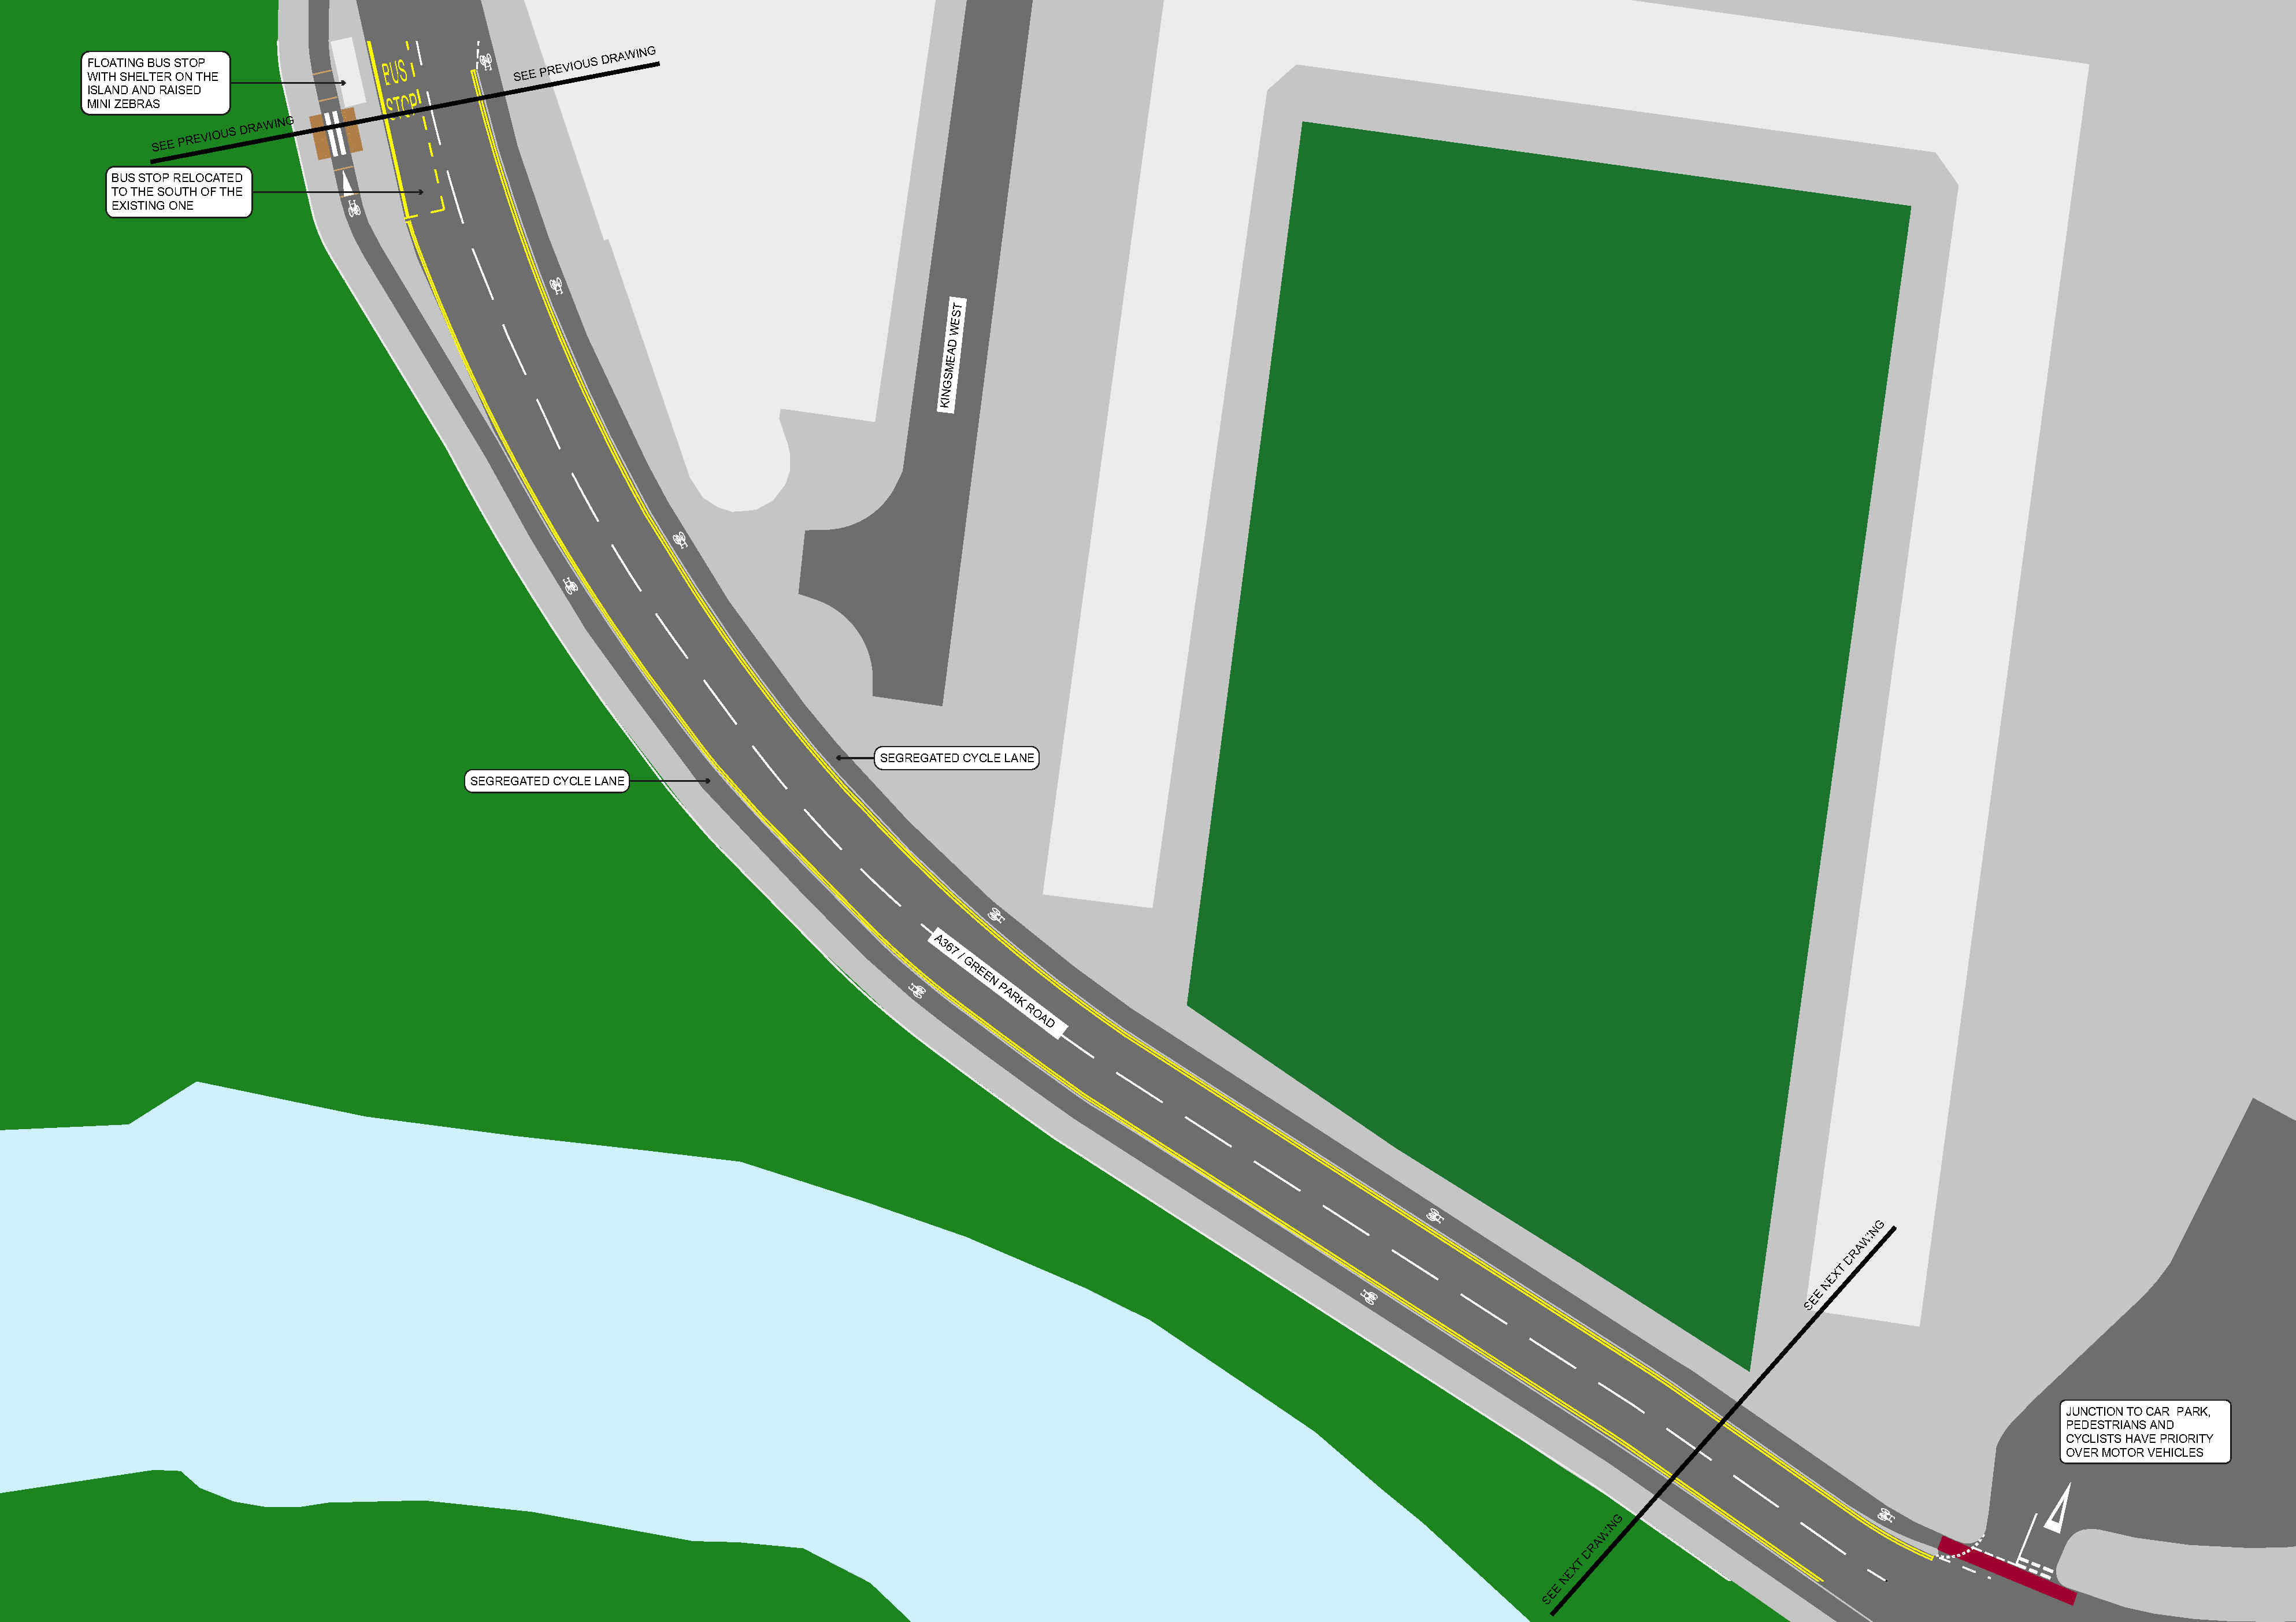 Map of section 2 of the proposed improvements to Green Park Road as part of the Bath Quays Links project.